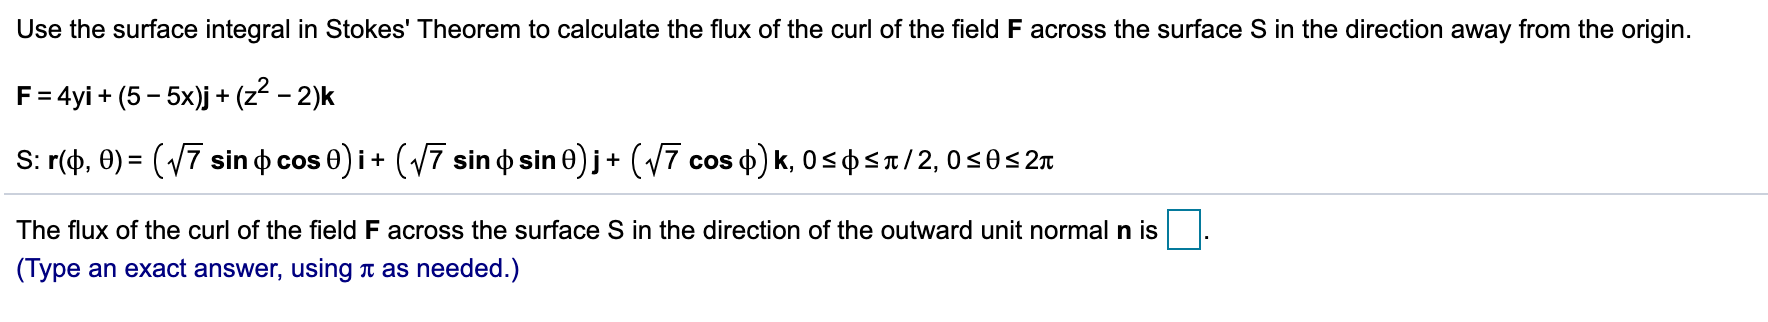 Use the surface integral in Stokes' Theorem to calculate the flux of the curl of the field F across the surface S in the direction away from the origin.
F= 4yi + (5 - 5x)j + (z - 2)k
S: r(), 0) = (V7 sin o cos 0) i+ (17 sin o sin 0) j+ (V7 cos o) k, 0<o<t/2, 0<0<2n
The flux of the curl of the field F across the surface S in the direction of the outward unit normal n is
(Type an exact answer, using t as needed.)
